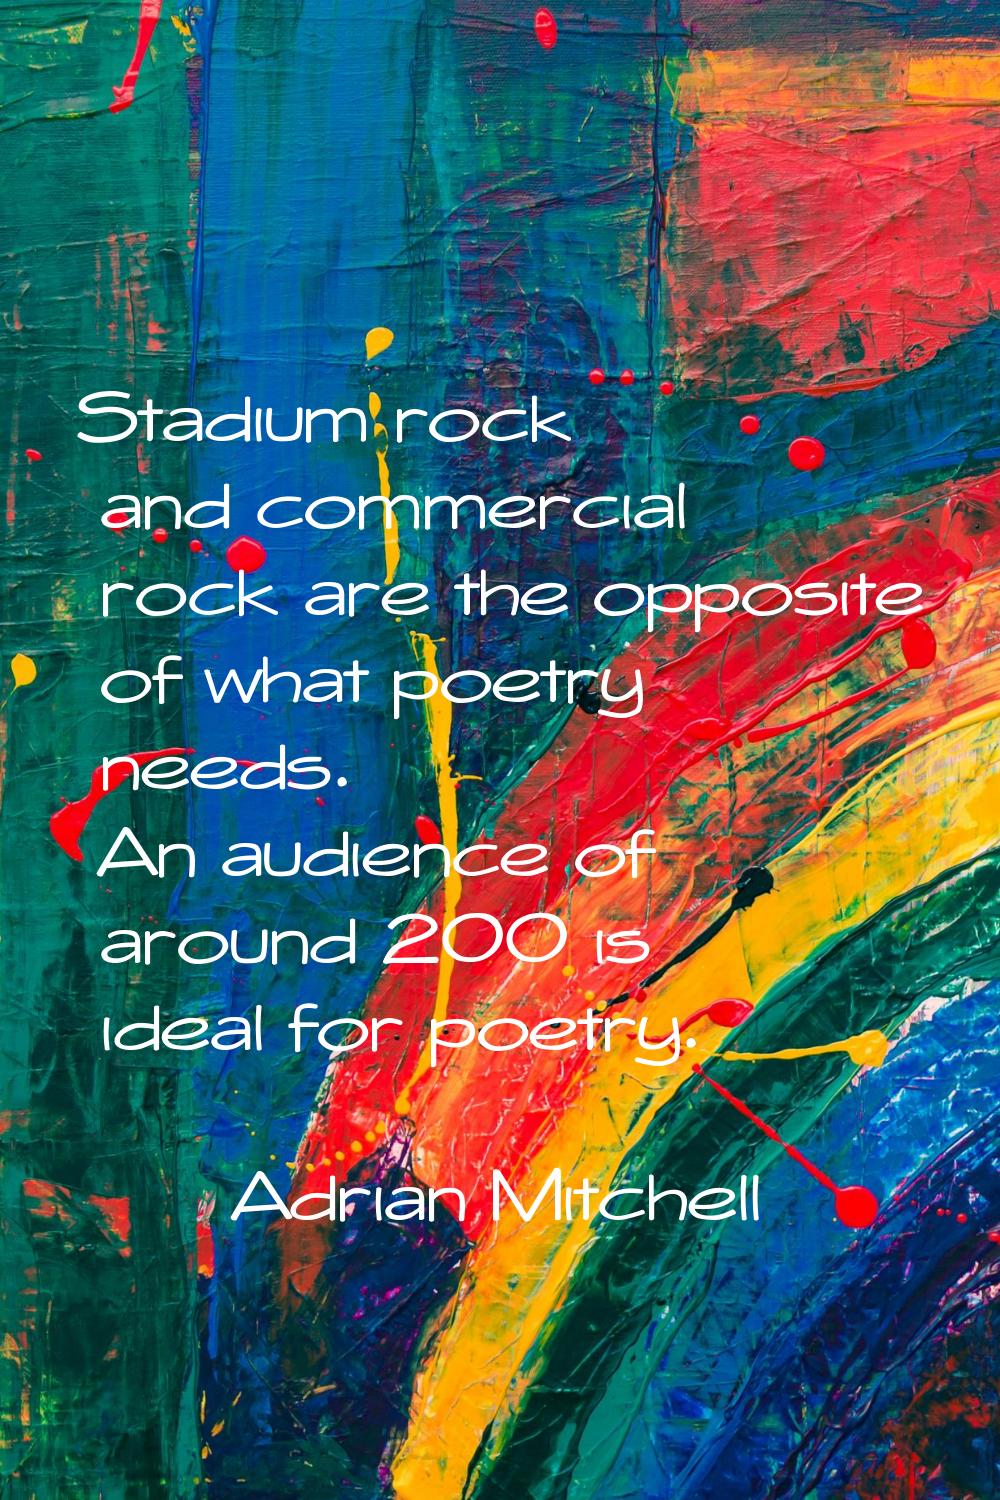 Stadium rock and commercial rock are the opposite of what poetry needs. An audience of around 200 i